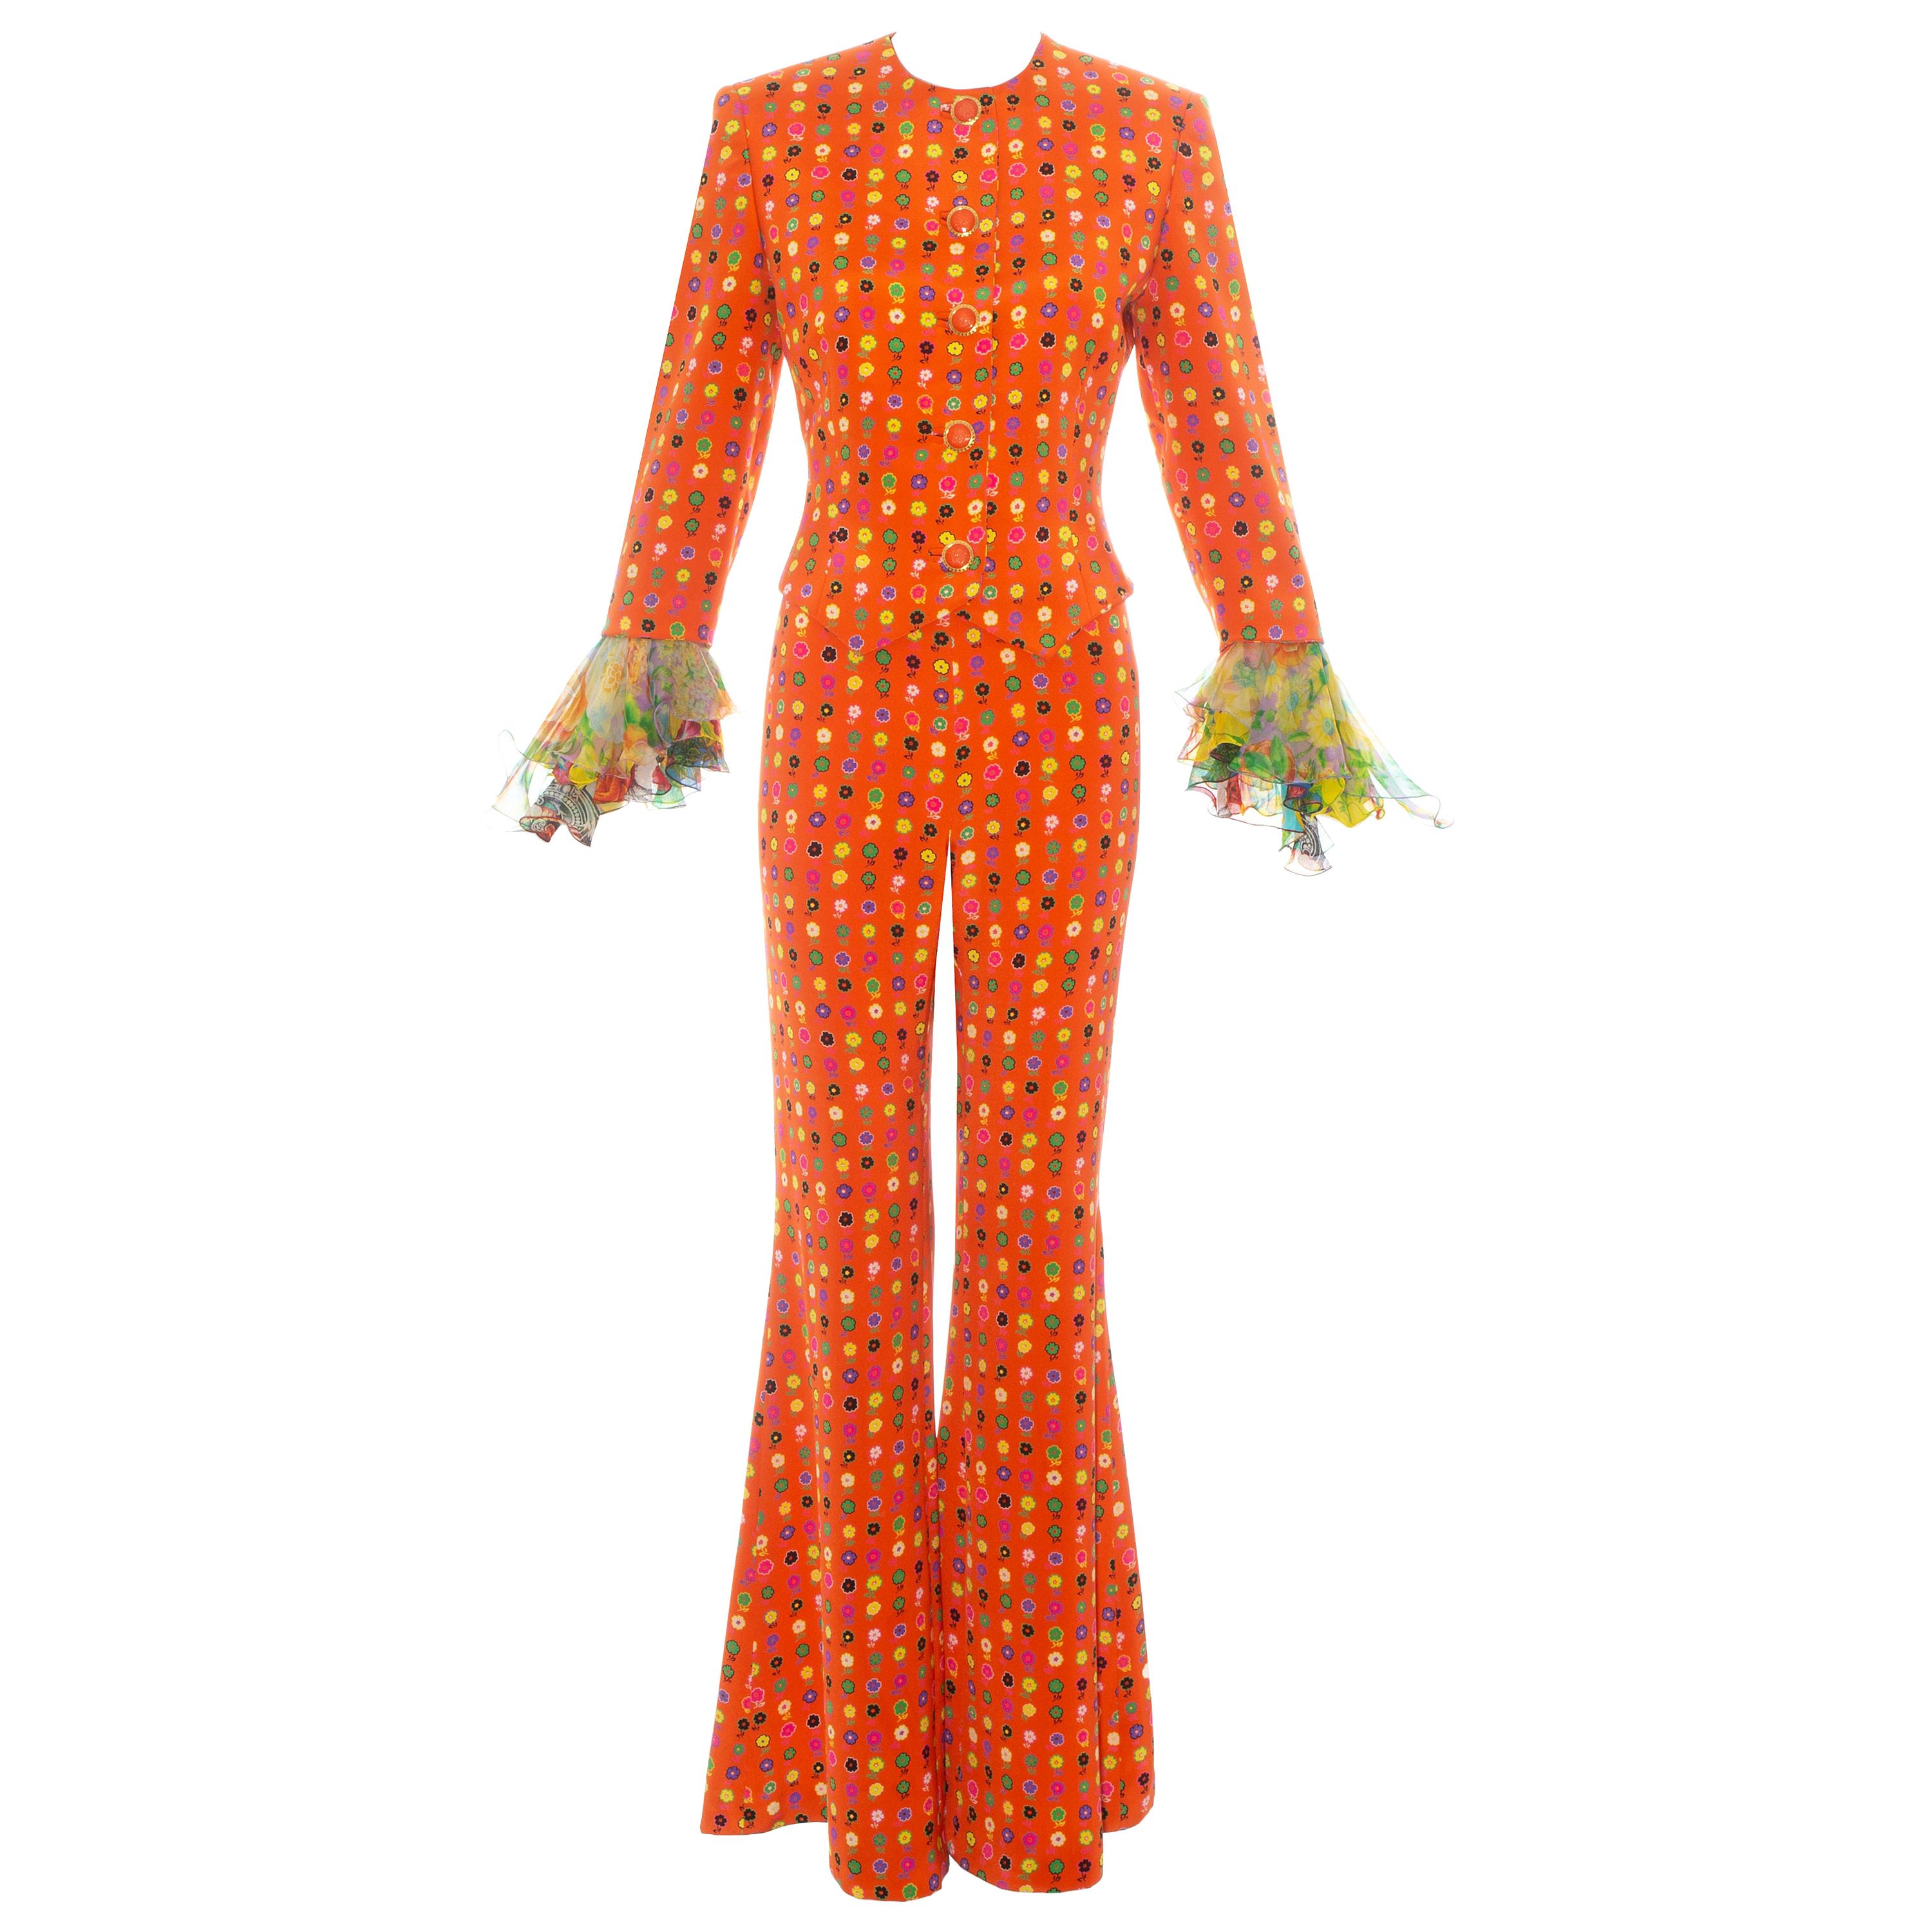 Gianni Versace orange floral printed silk flared pant suit, ss 1993